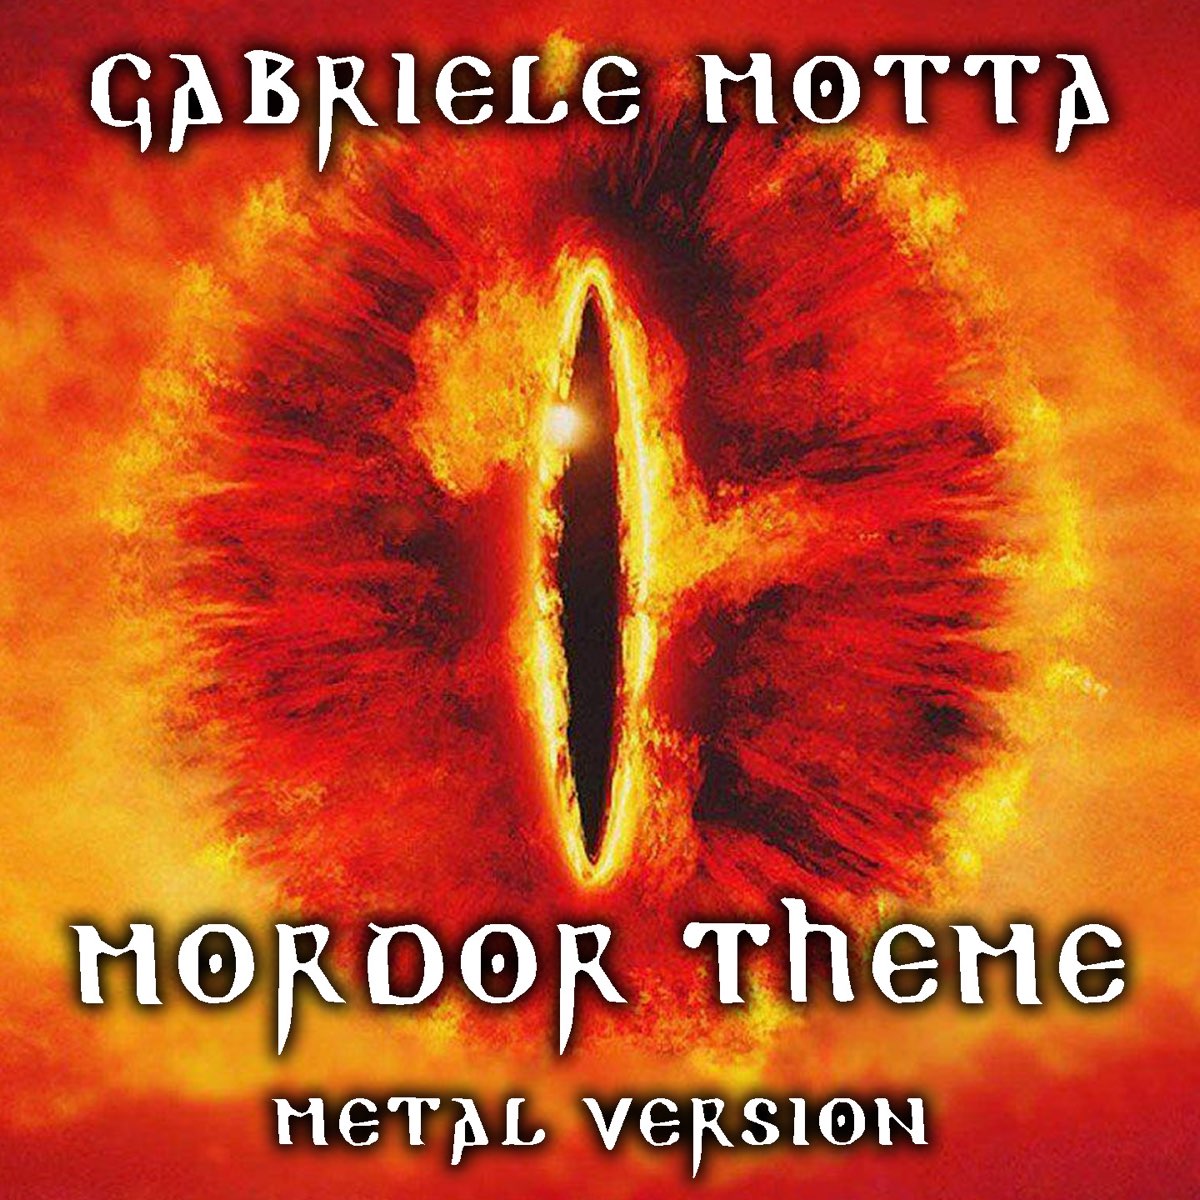 Mordor Theme (From "The Lord of the Rings", Metal Version) - Single by  Gabriele Motta on Apple Music